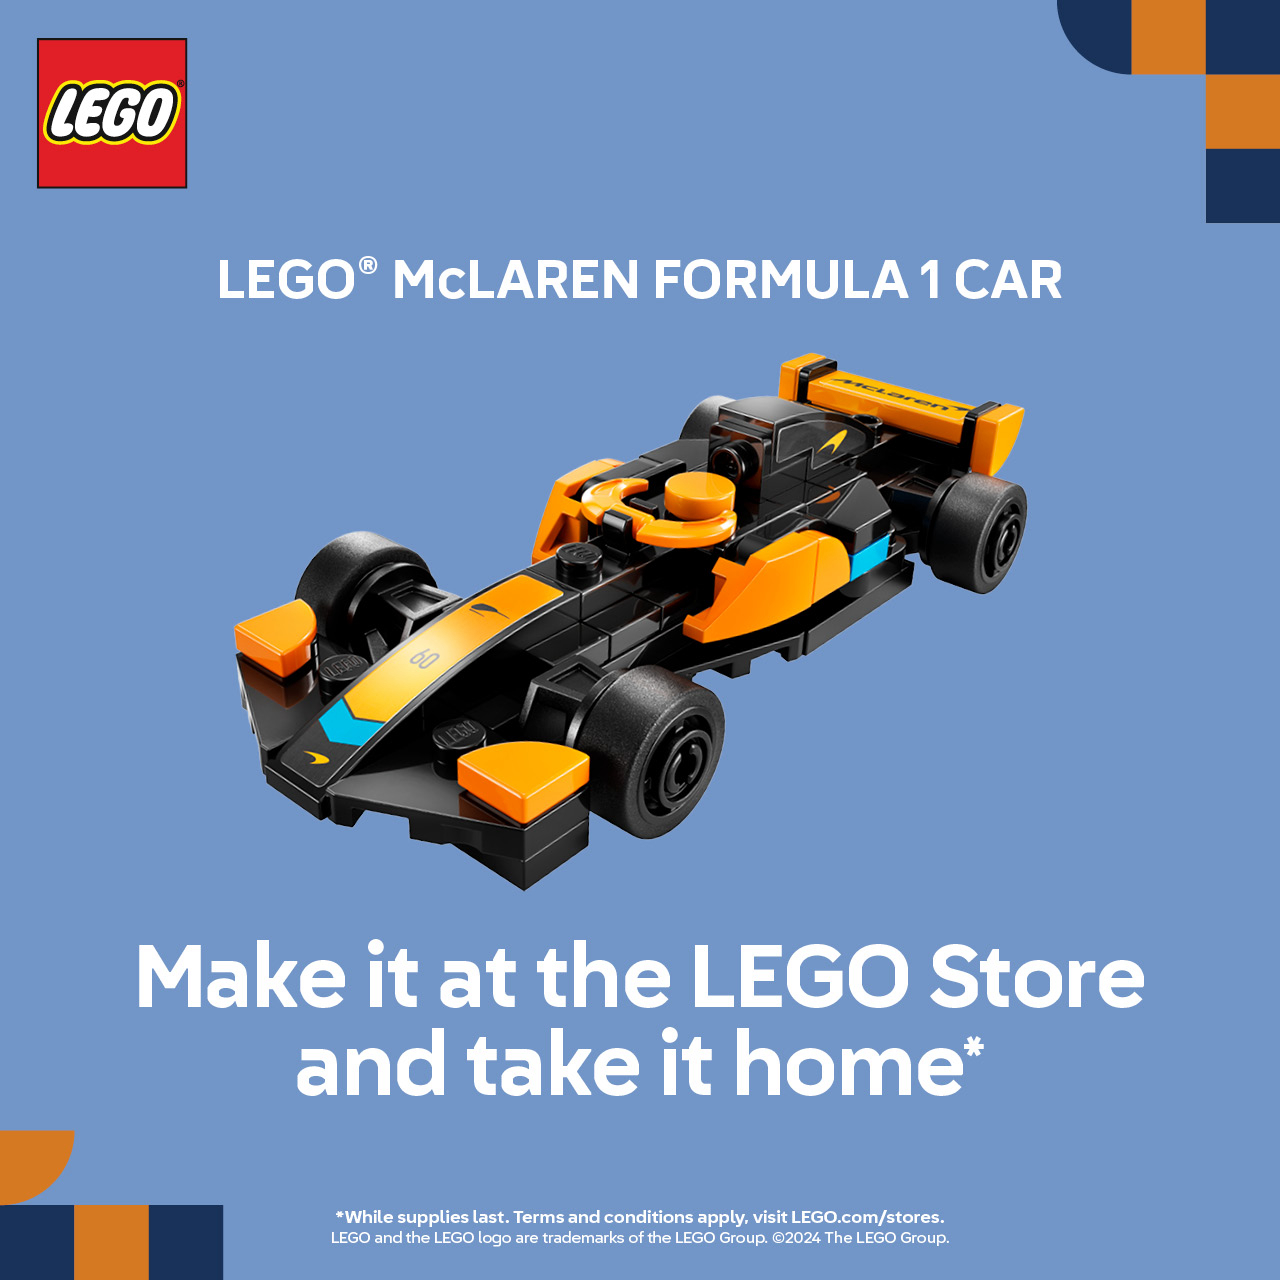 LEGO USCA Campaign 54 Build a LEGO® McLaren Forumula 1 Car at The LEGO Store and take it home with you EN 1280x1280 1